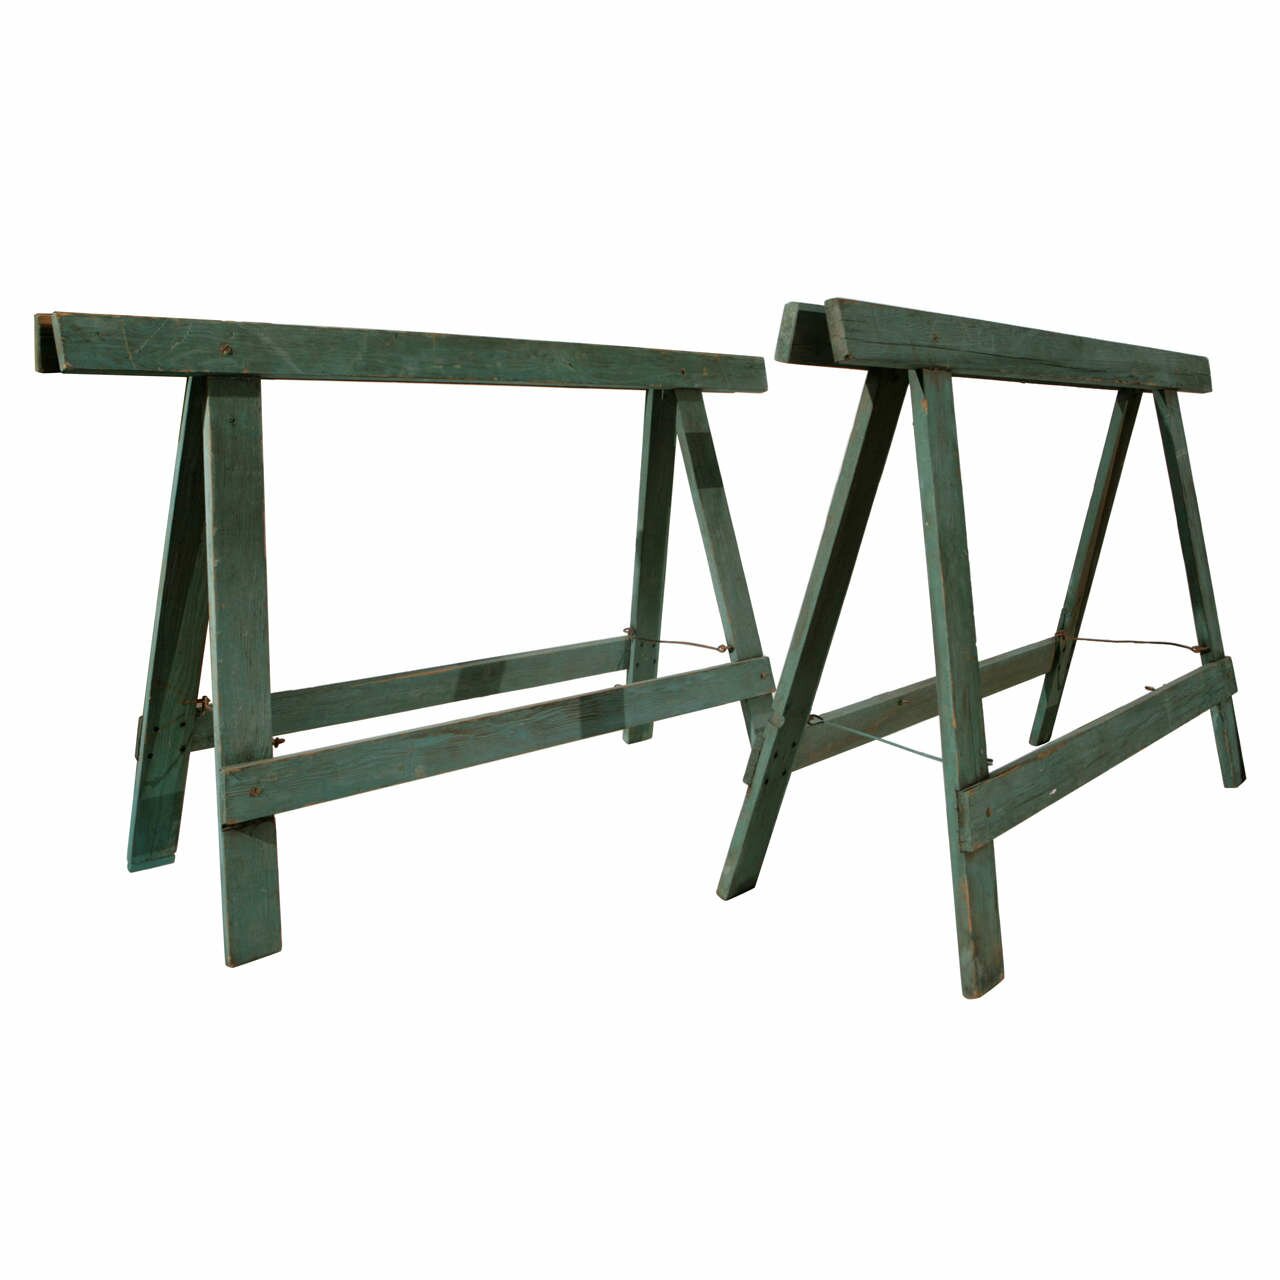 Work Bench Legs | Workbench Supports | Workbench Legs with Casters